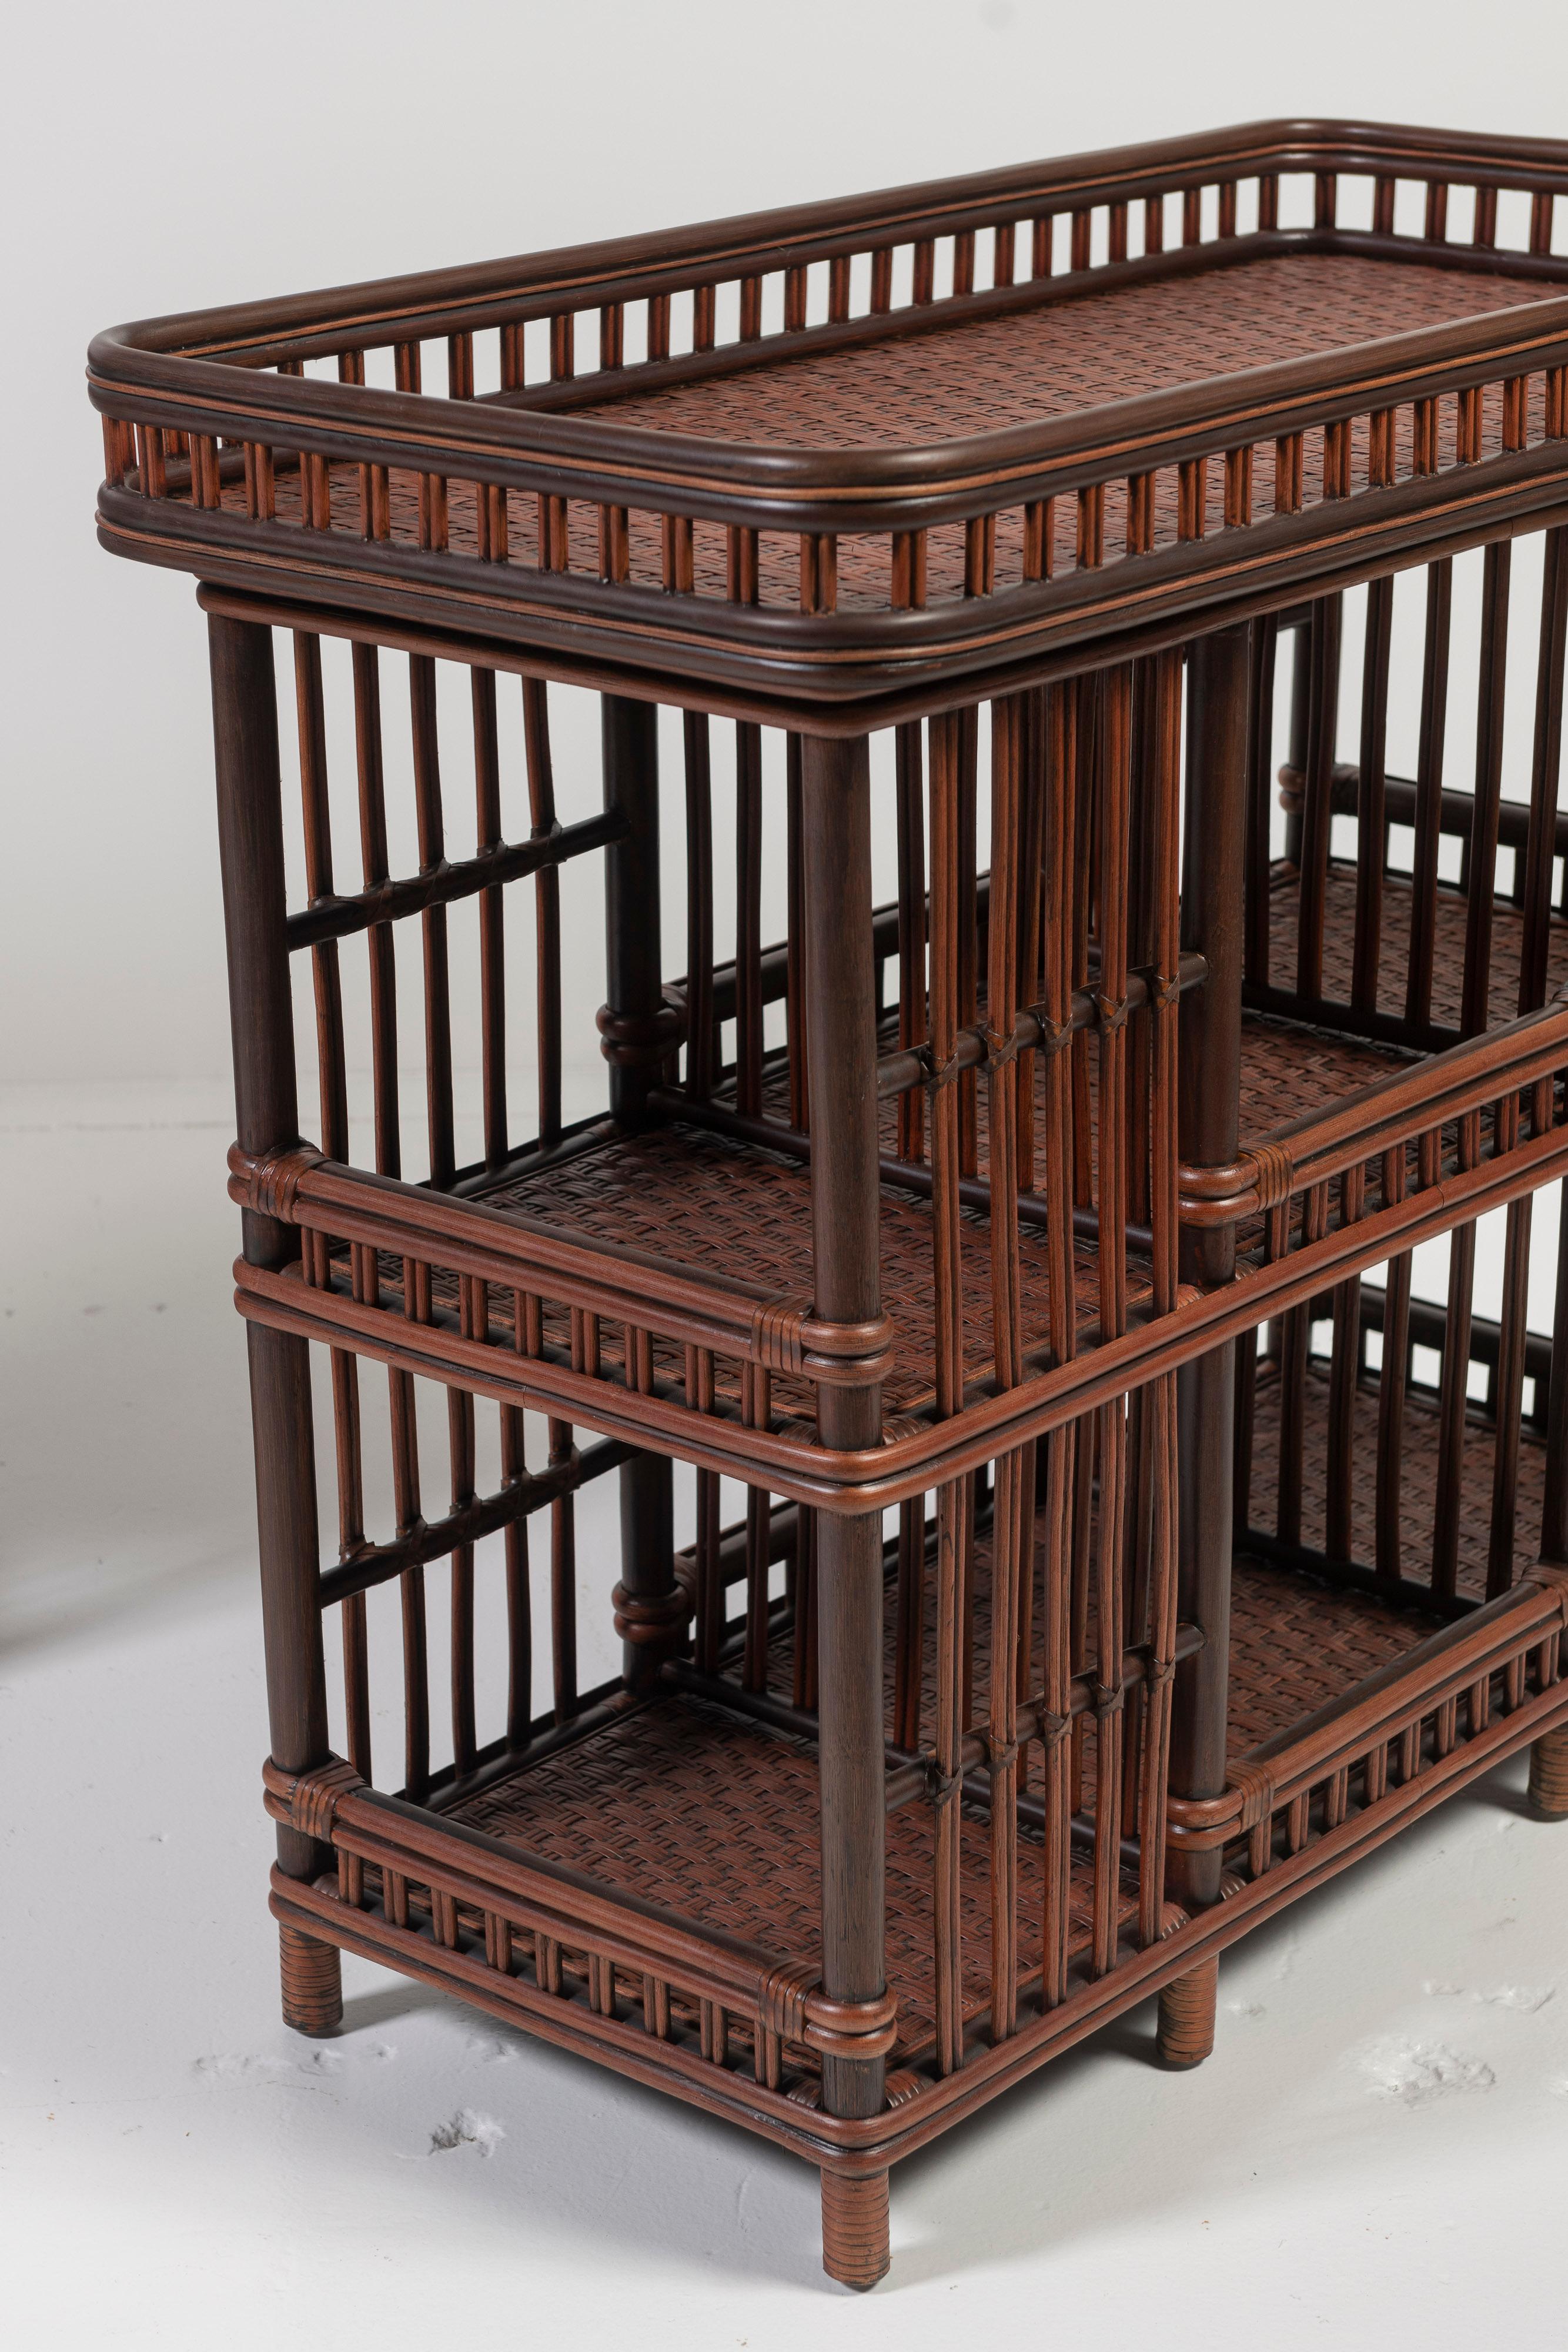 Two Williamsburg Coffee Finish Wicker Tiki Bars, Etegeres or Bookcases In Good Condition For Sale In San Francisco, CA